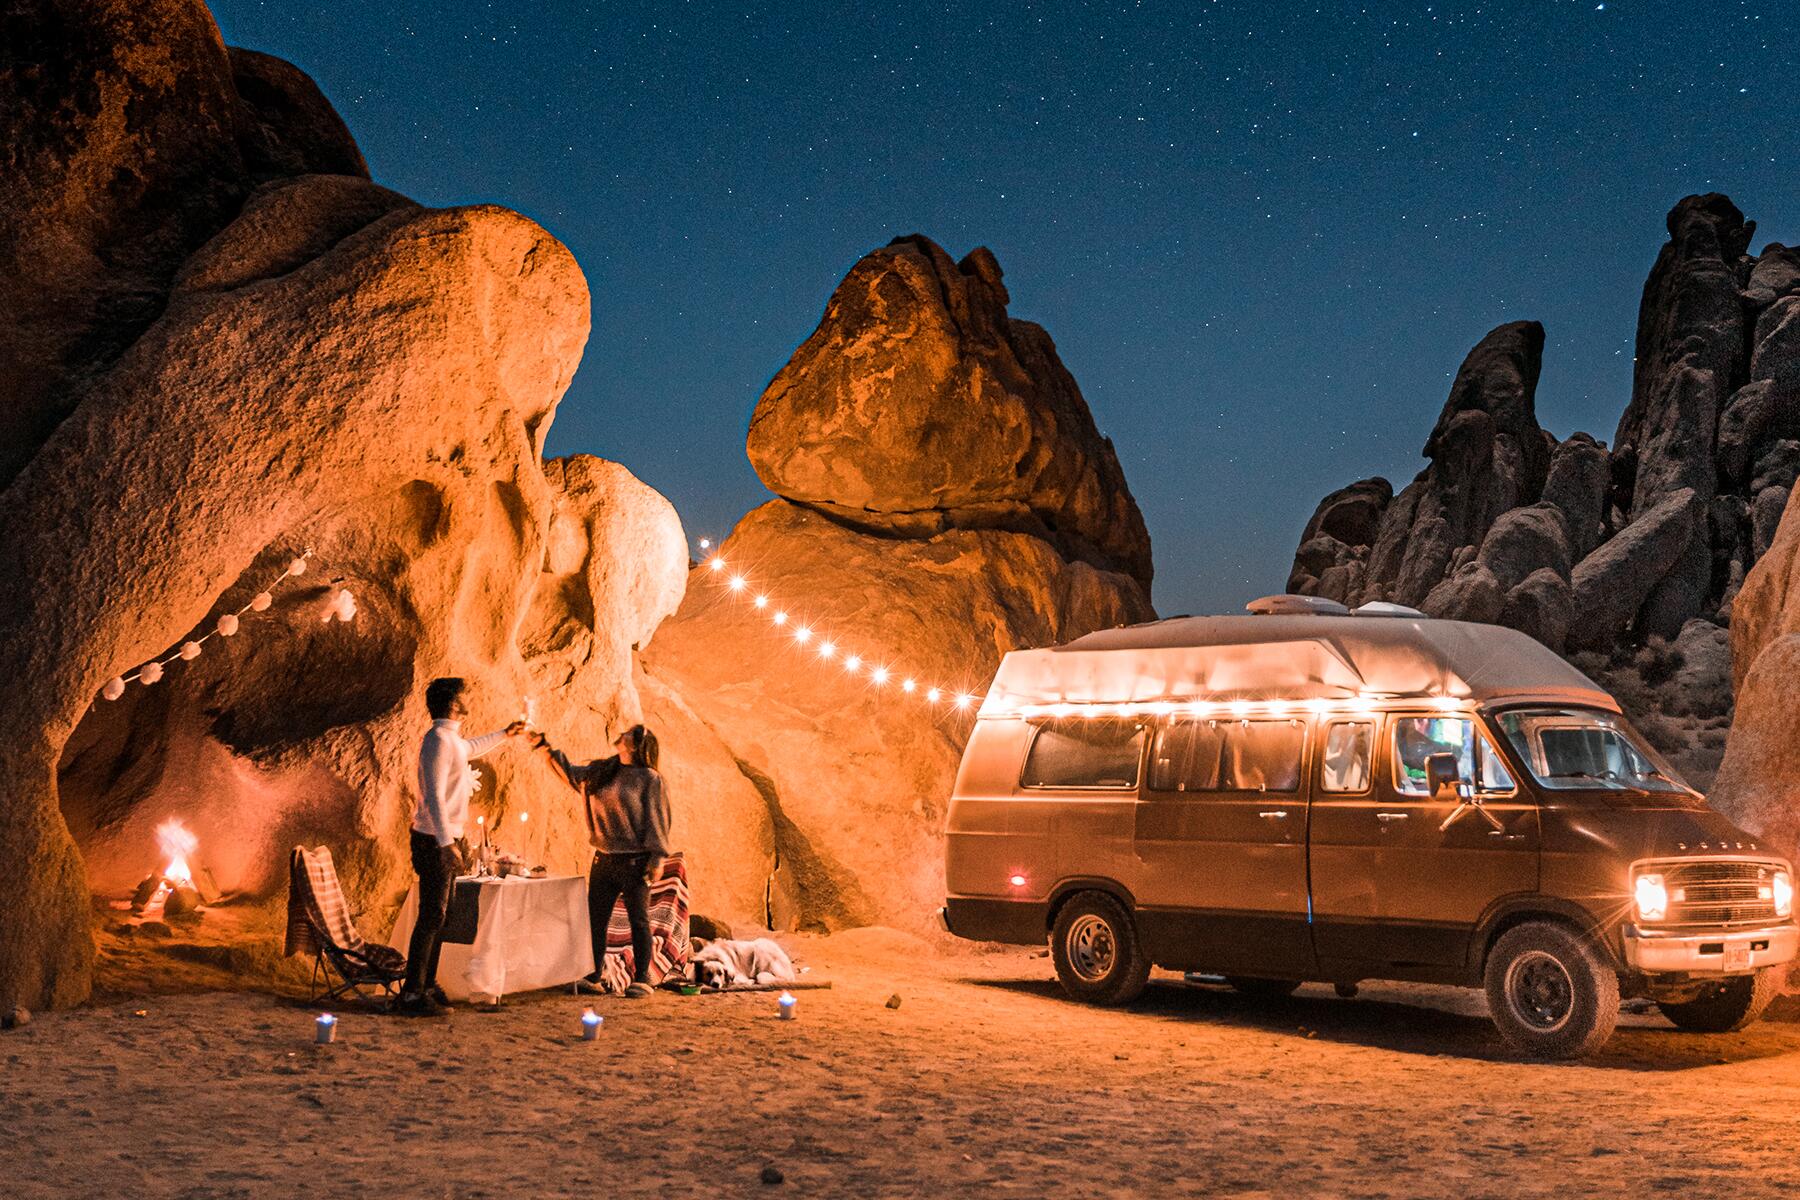 How to earn the money to fund your van conversion to start your Vanlife?